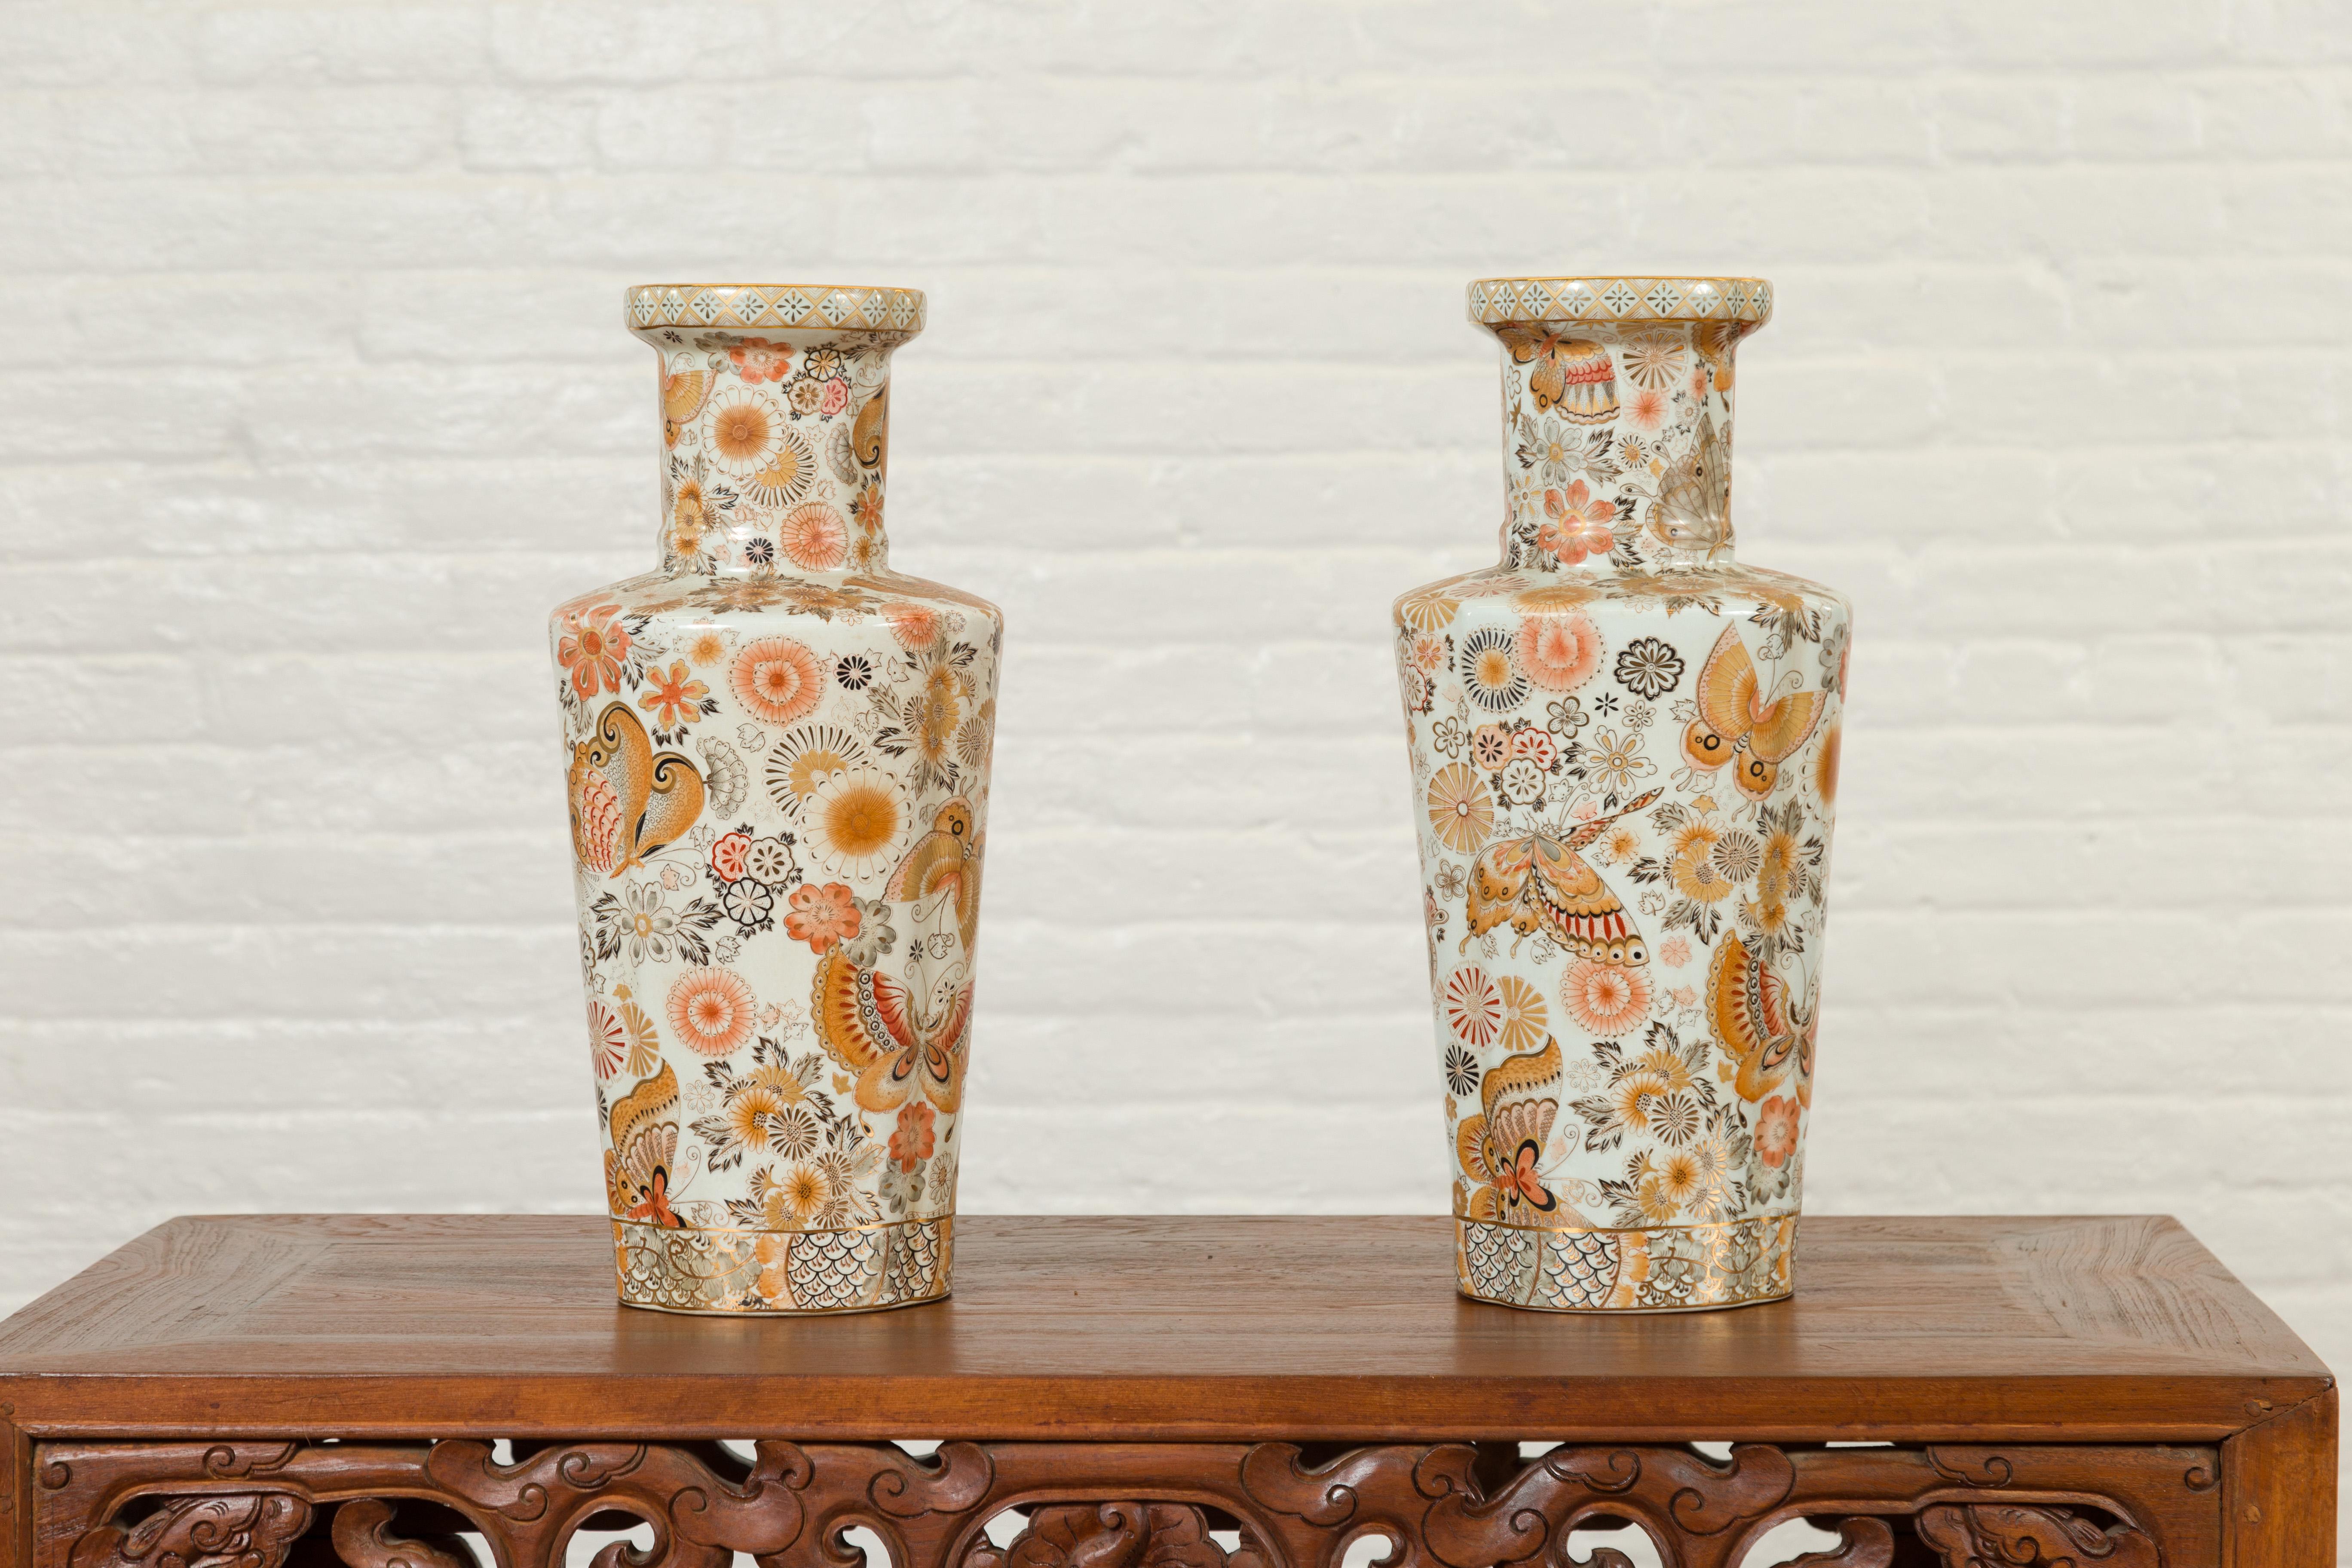 A pair of Chinese vintage Japanese Kutani style vases from the mid-20th century, with floral and butterfly decor. Created in China during the midcentury period, each of this pair of Kutani style vases attracts our attention with its golden, brown